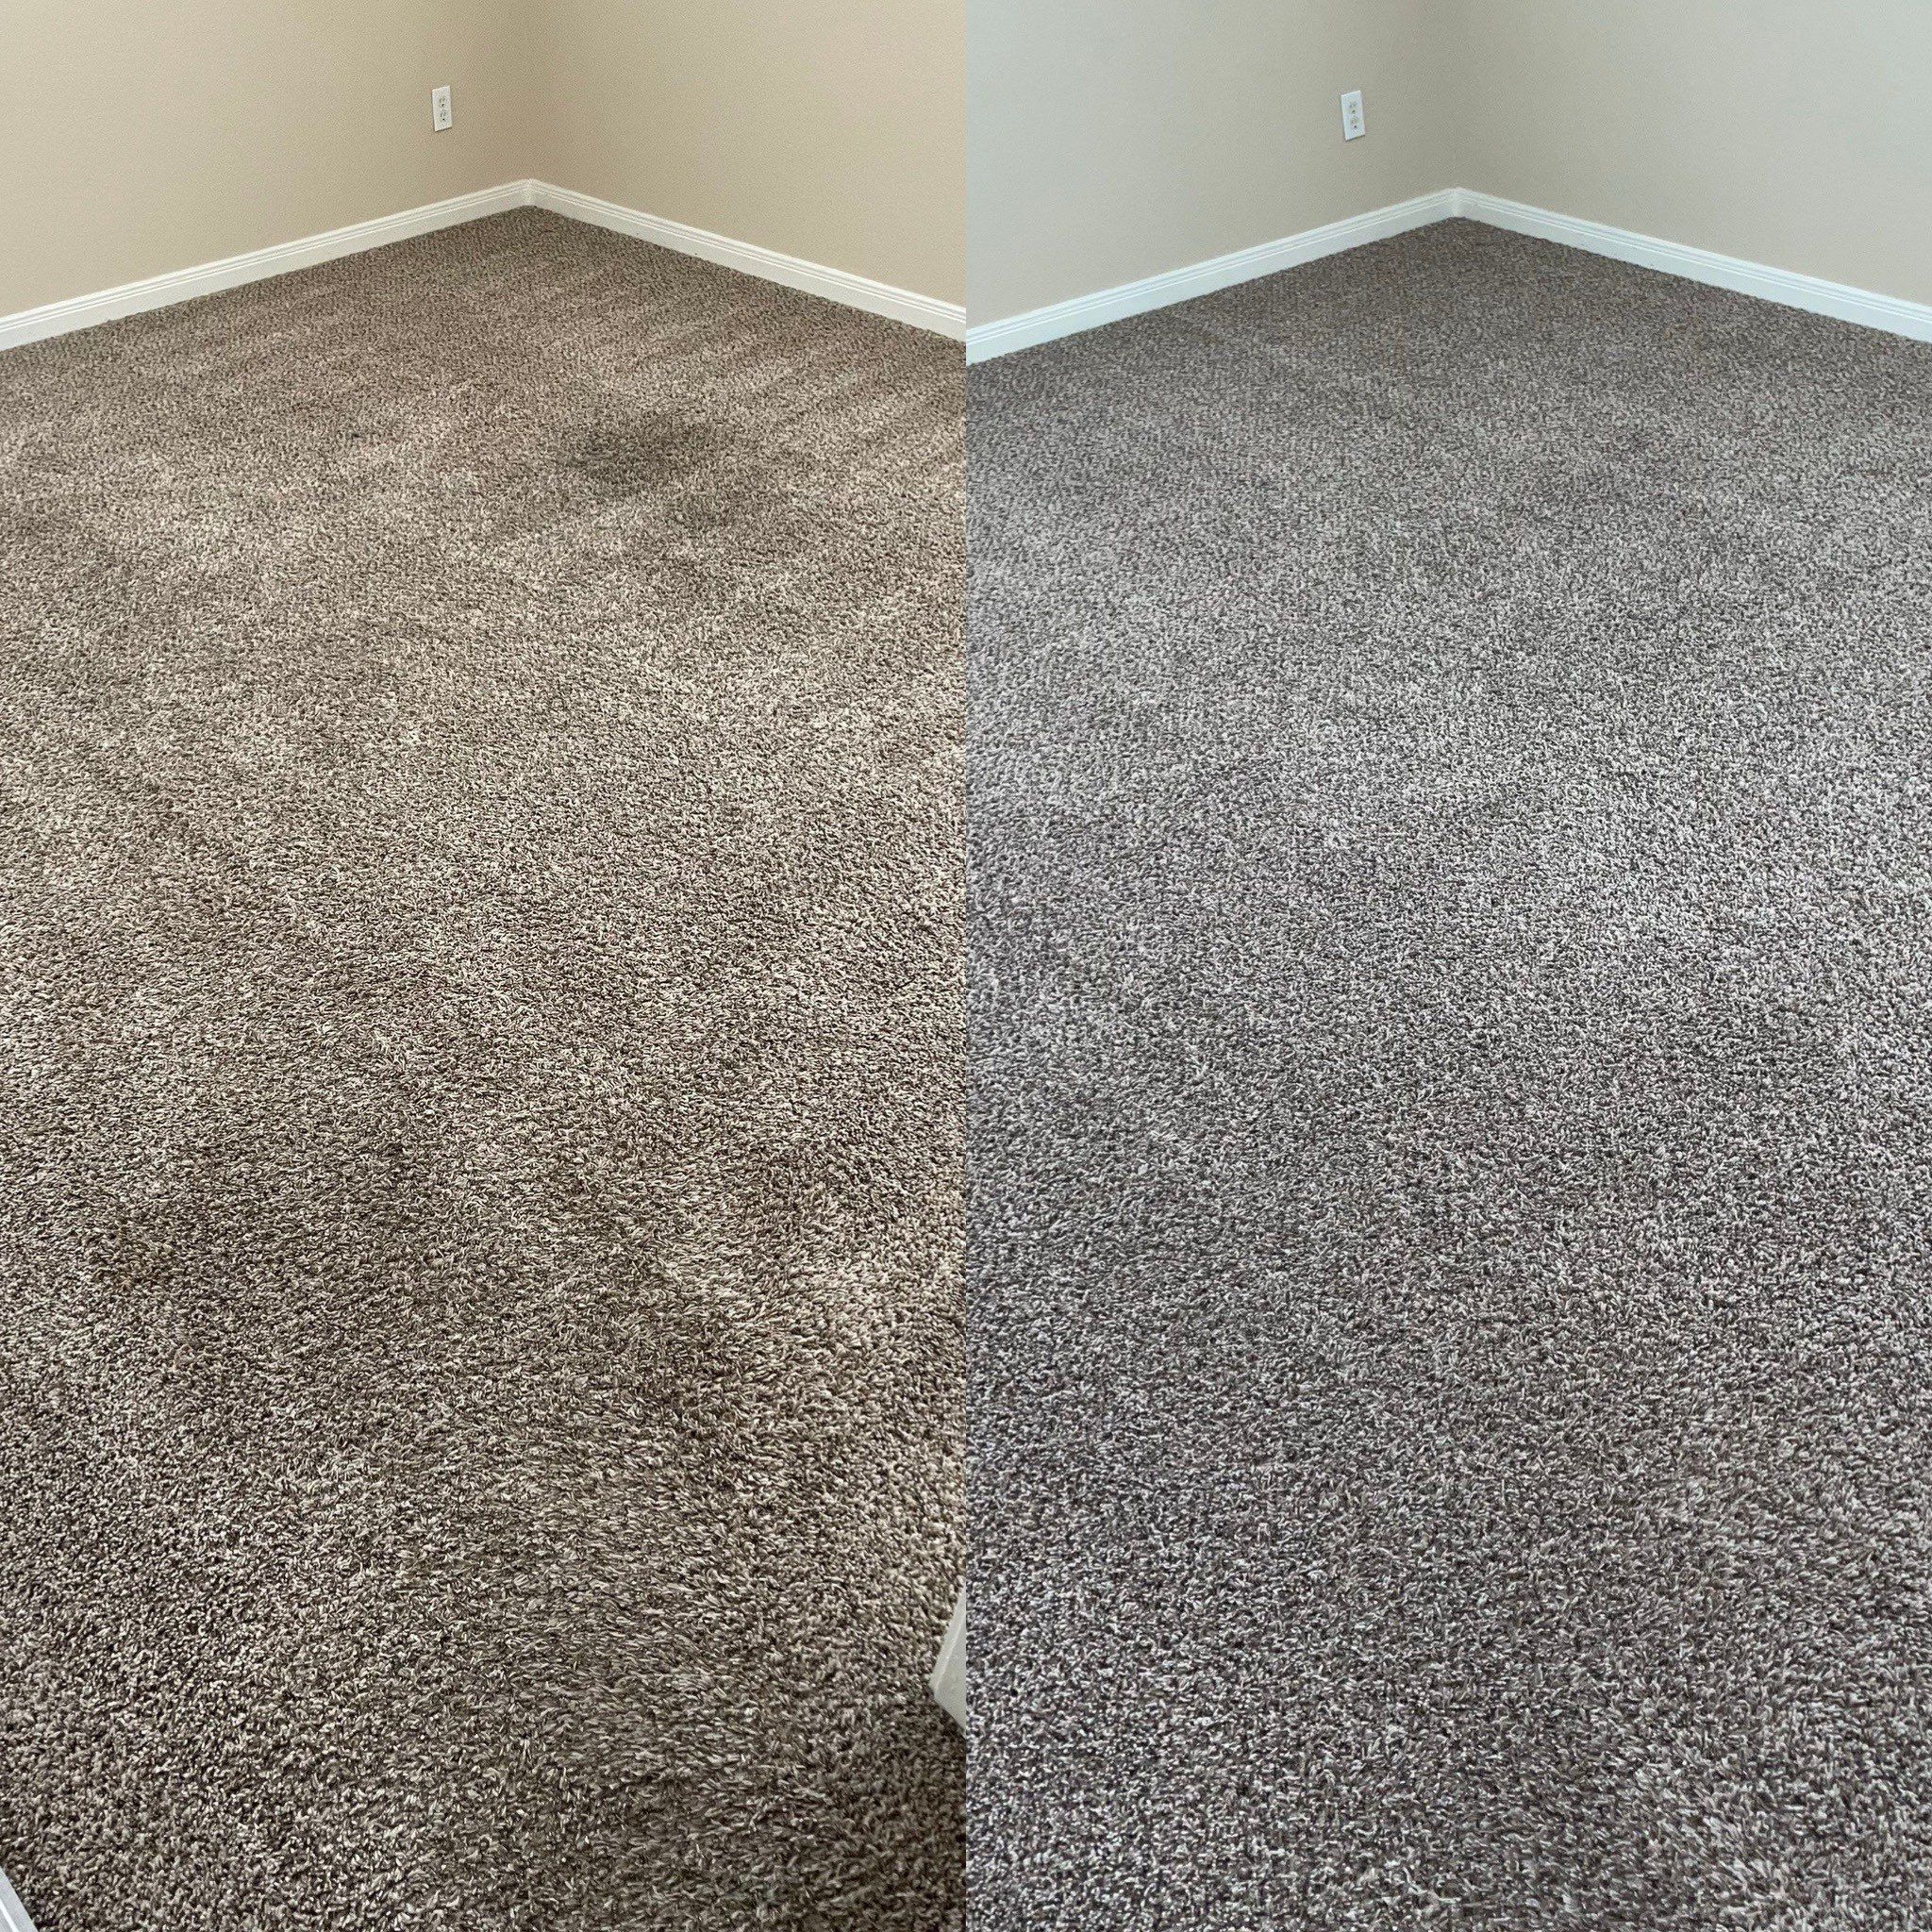 carpet cleaning removing stains and dirt making the carpet look clean and fresh in a room in san antonio